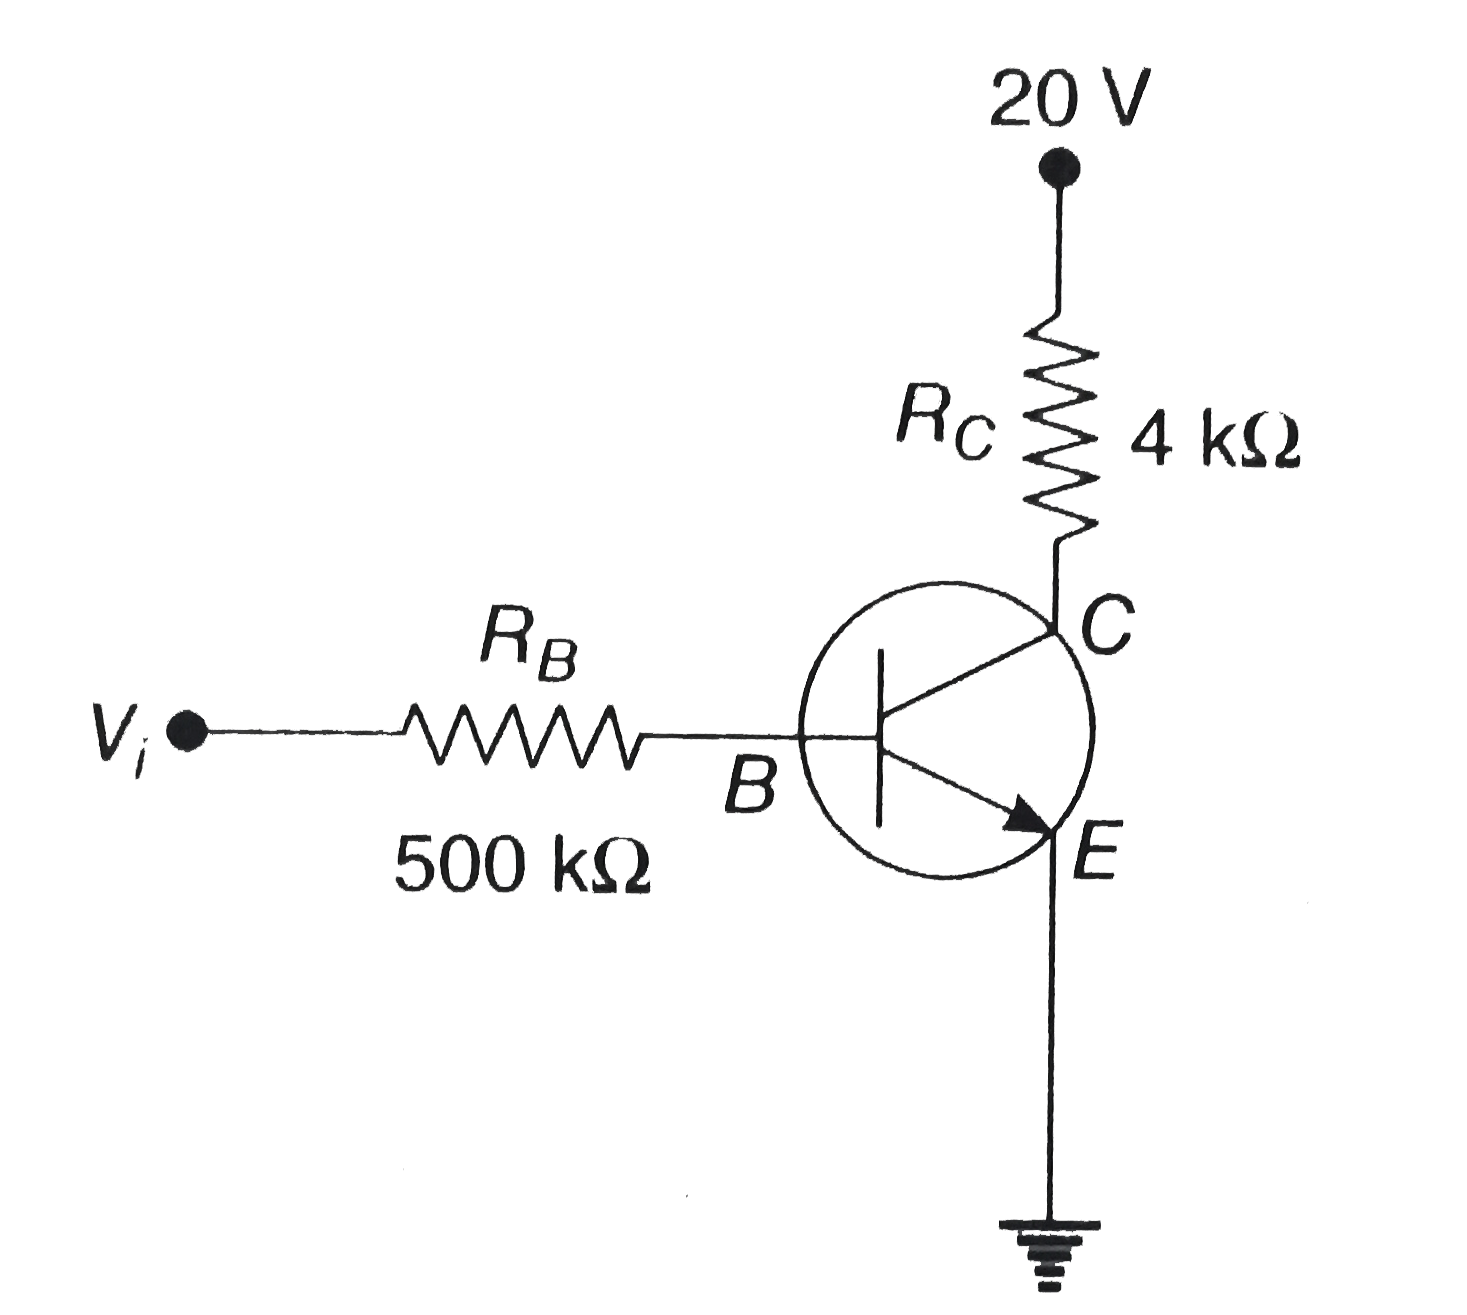 In the circuit shown in the figure, the input voltage V(i) is 20V,V(BE)=0 and V(CE)=0. The values of I(B),I(C) and beta are given by: